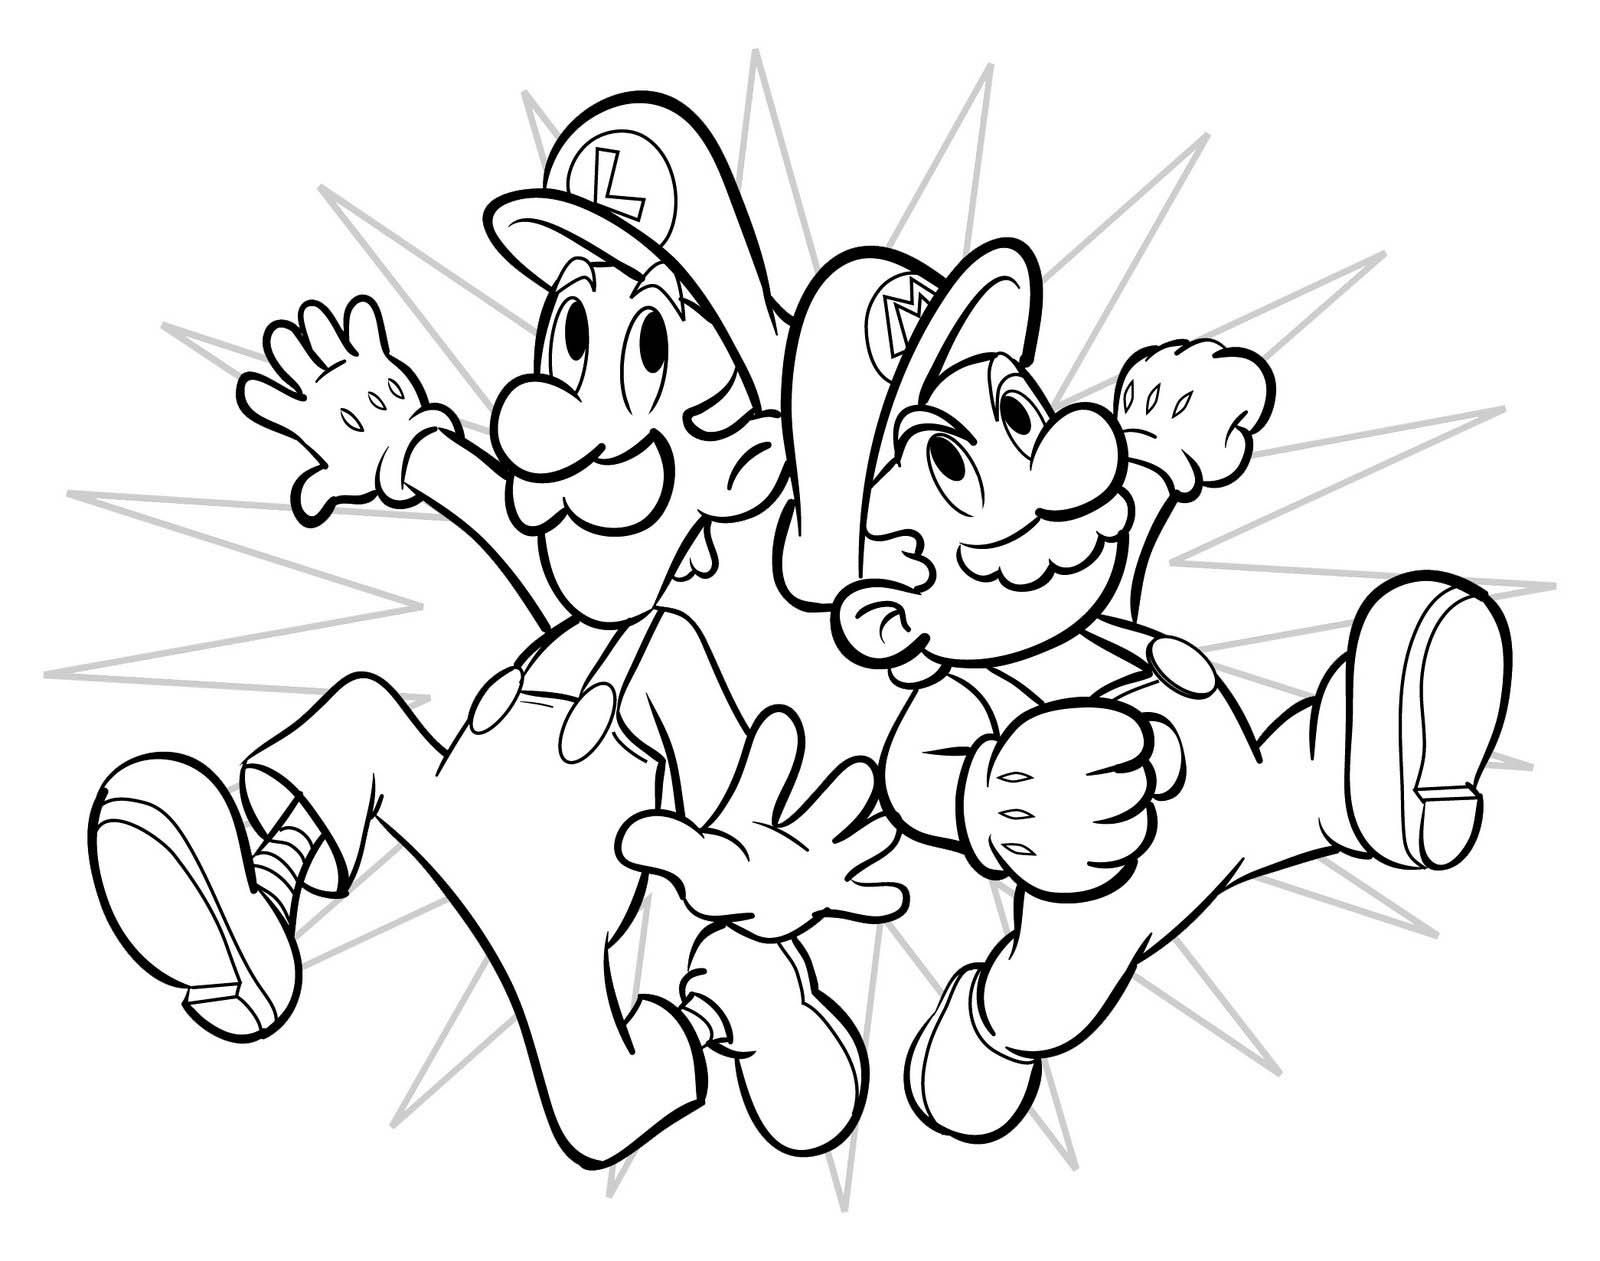 All Mario Characters Coloring Pages - Coloring Home